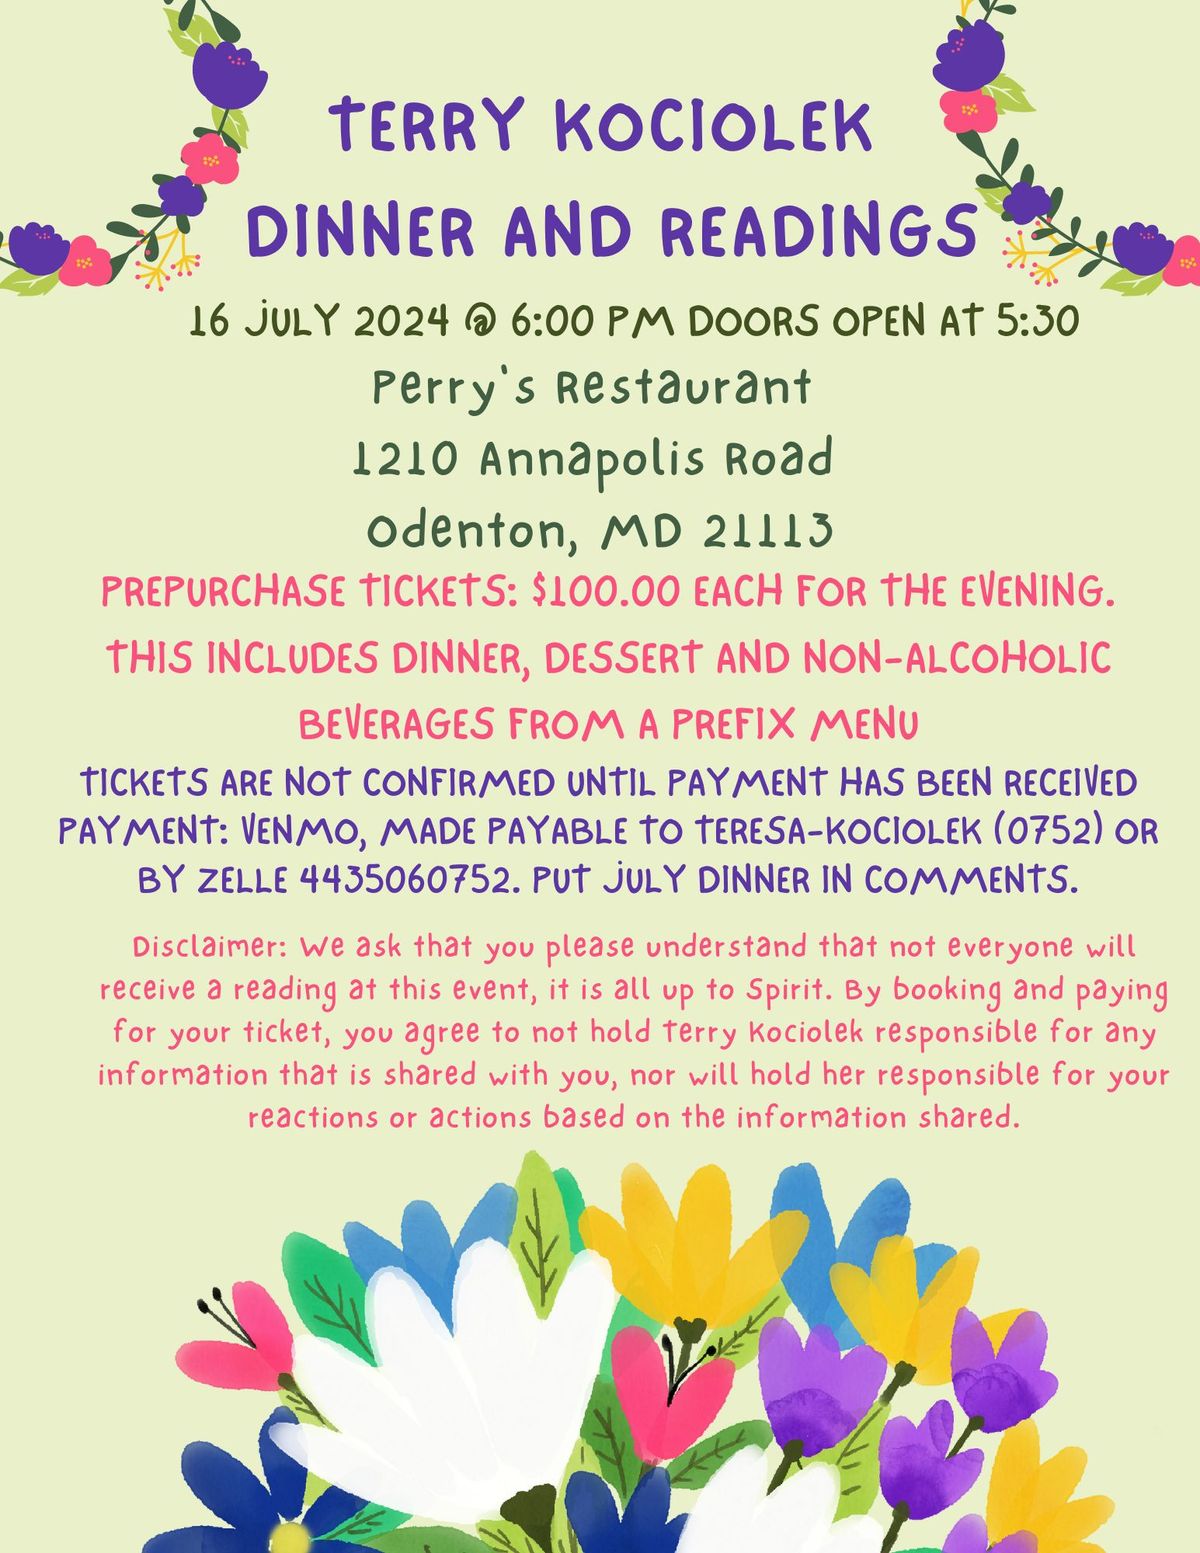 Psychic Readings and Dinner Psychic Medium Terry Kociolek at Perry's Restaurant Odenton MD